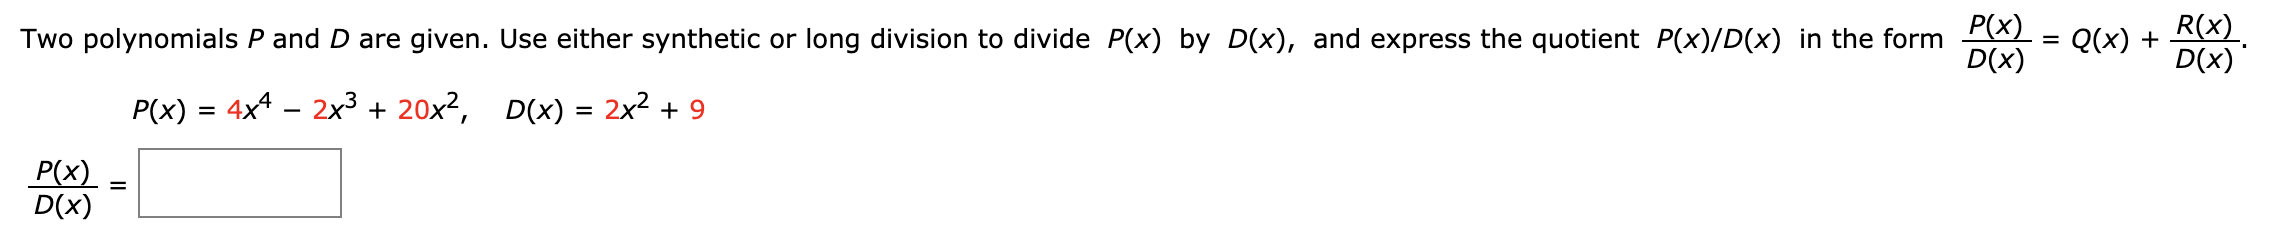 R(x)
D(x)
Р(x)
D(x)
Two polynomials P and D are given. Use either synthetic or long division to divide P(x) by D(x), and express the quotient P(x)/D(x) in the form
Q(x)
=
P(x) 4x4 -2x3 + 20x2, D(x) = 2x2 9
Р(x)
D(x)
